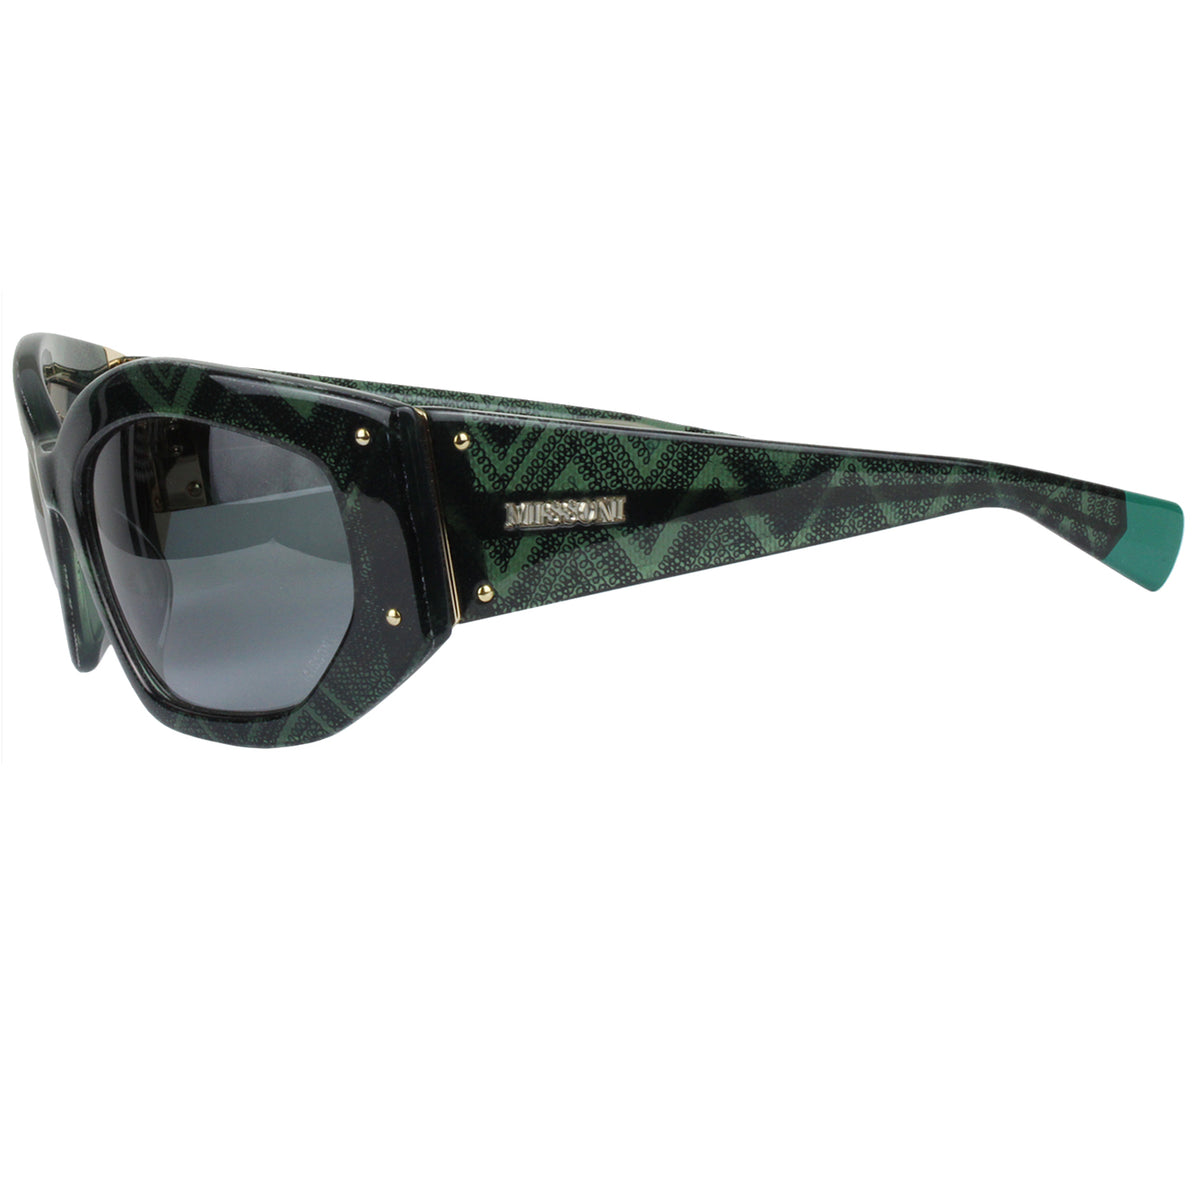 Top Quality Retro Laser Logo Missoni Sunglasses For Men And Women Hot  Fashion Design With Shiny Gold Finish Perfect For Summer Z0350W From  Sunglasses68, $15.59